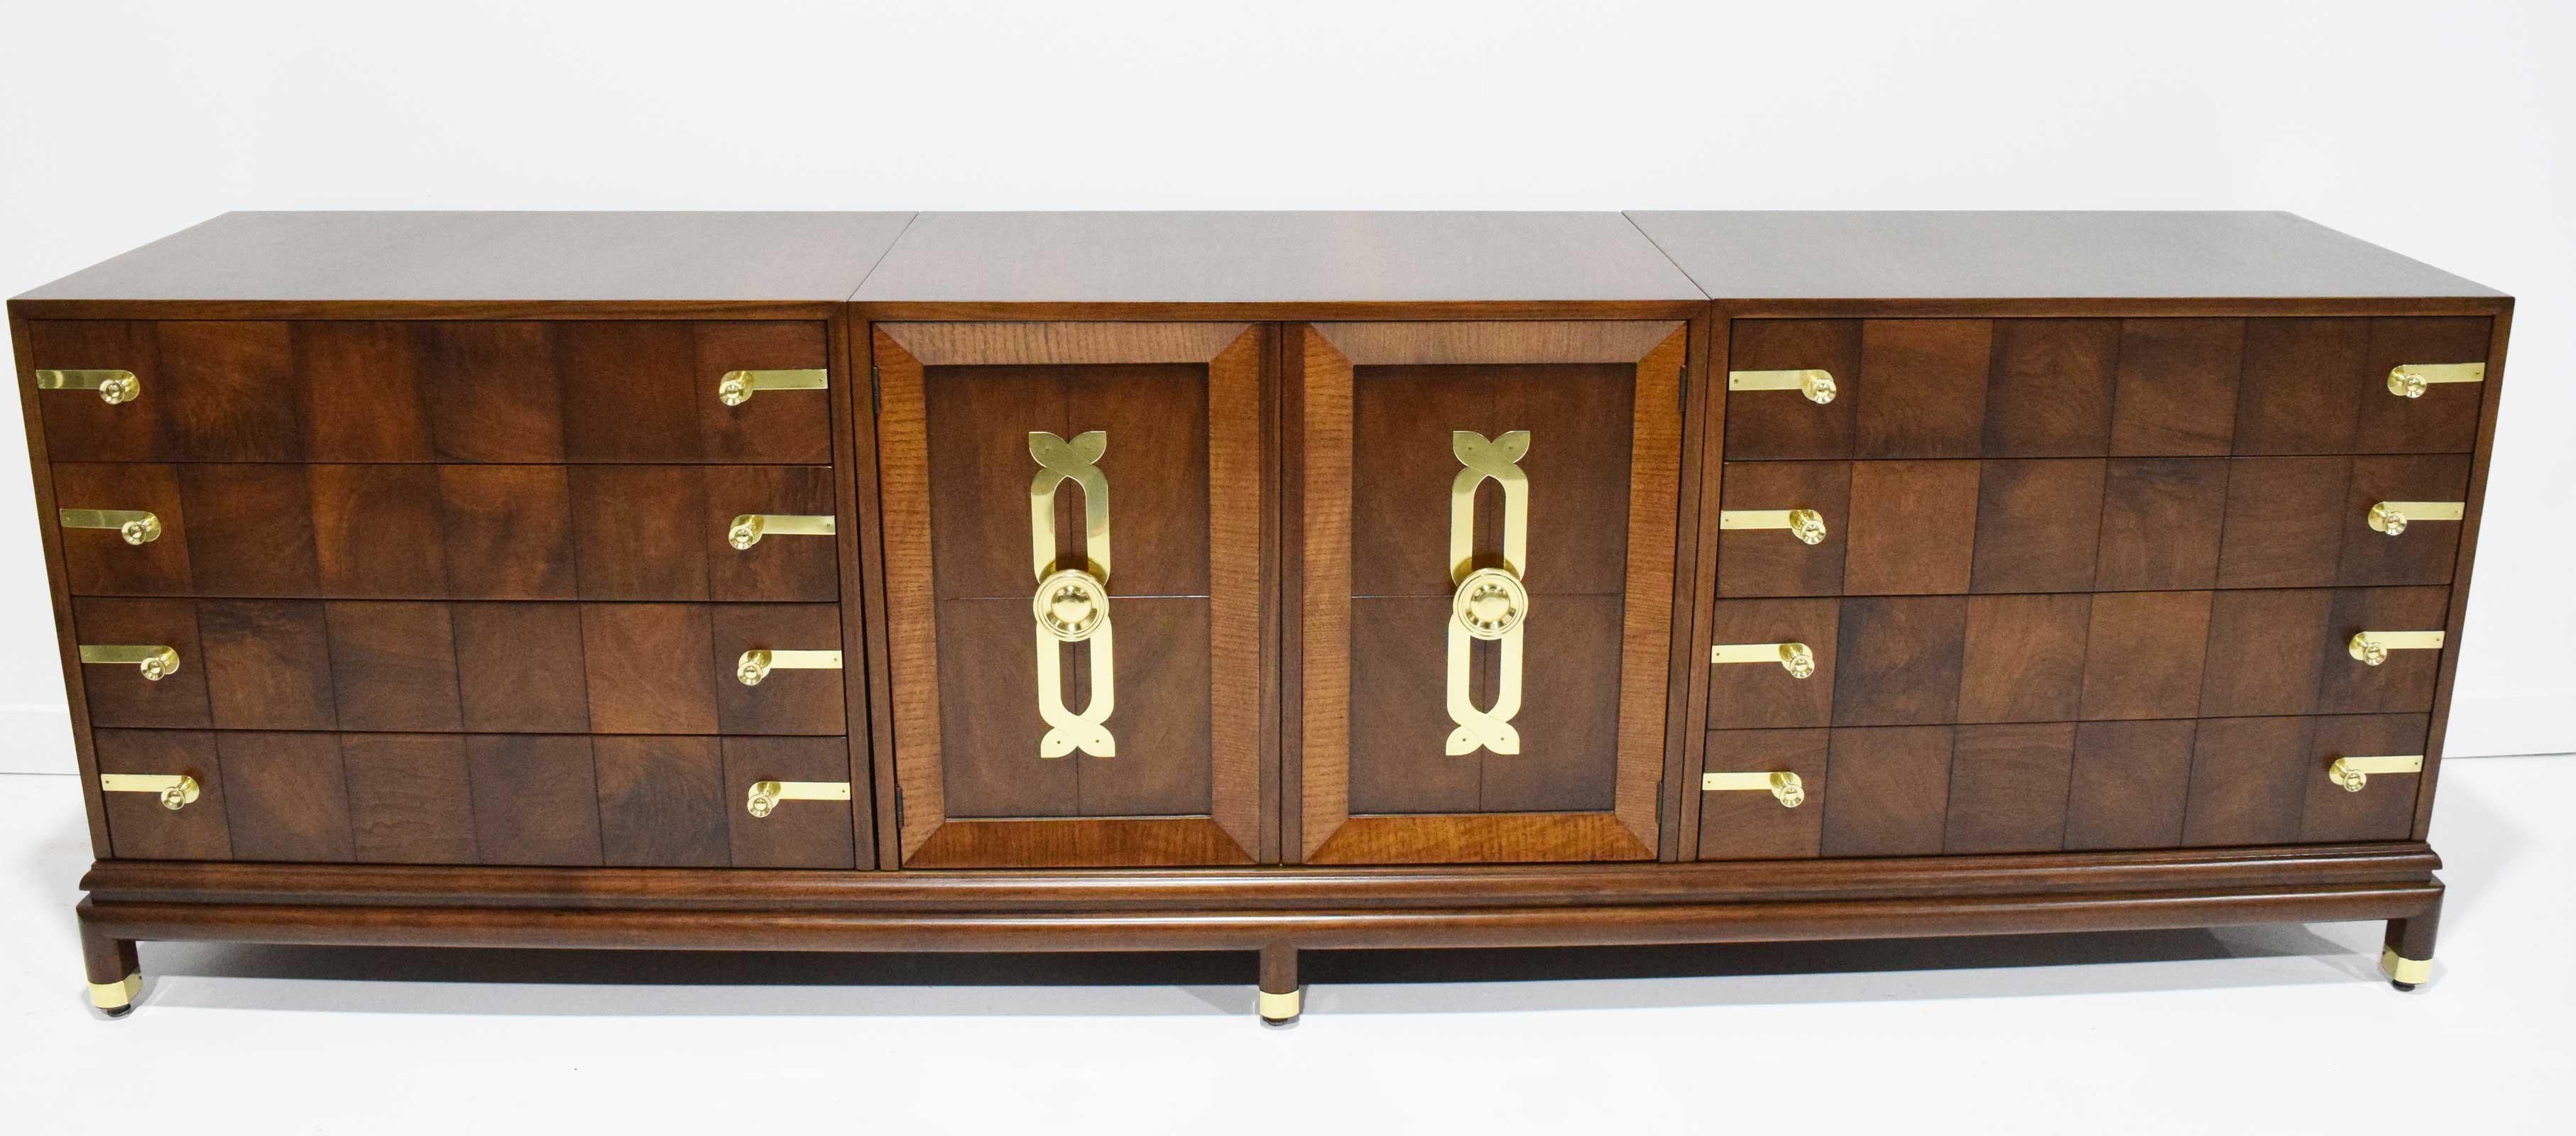 Beautiful sideboard/credenza by Renzo Rutili for Johnson Furniture Company. Executed in walnut and brass, comprised of three bays that sit on a singular base.

Lorenzo (Renzo) R. Rutili 1901-1966

Lorenzo (Renzo) Rutili was born in Donora,